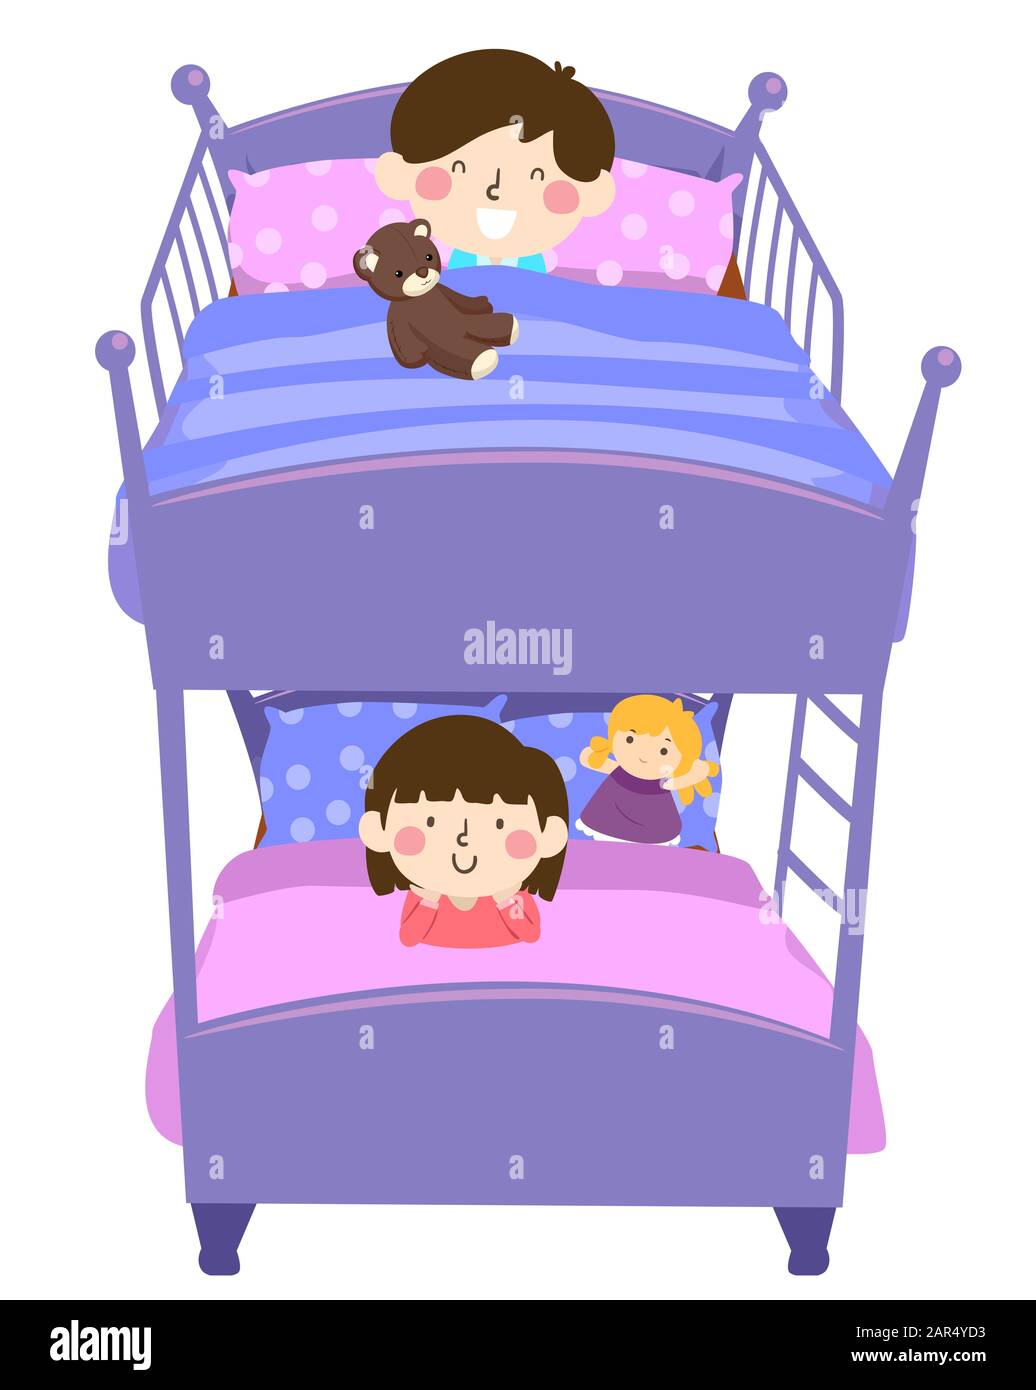 Illustration of Kids in a Double Deck Bed with Kid Boy on Top Deck with a Teddy Bear and Kid Girl Below with a Doll Stock Photo